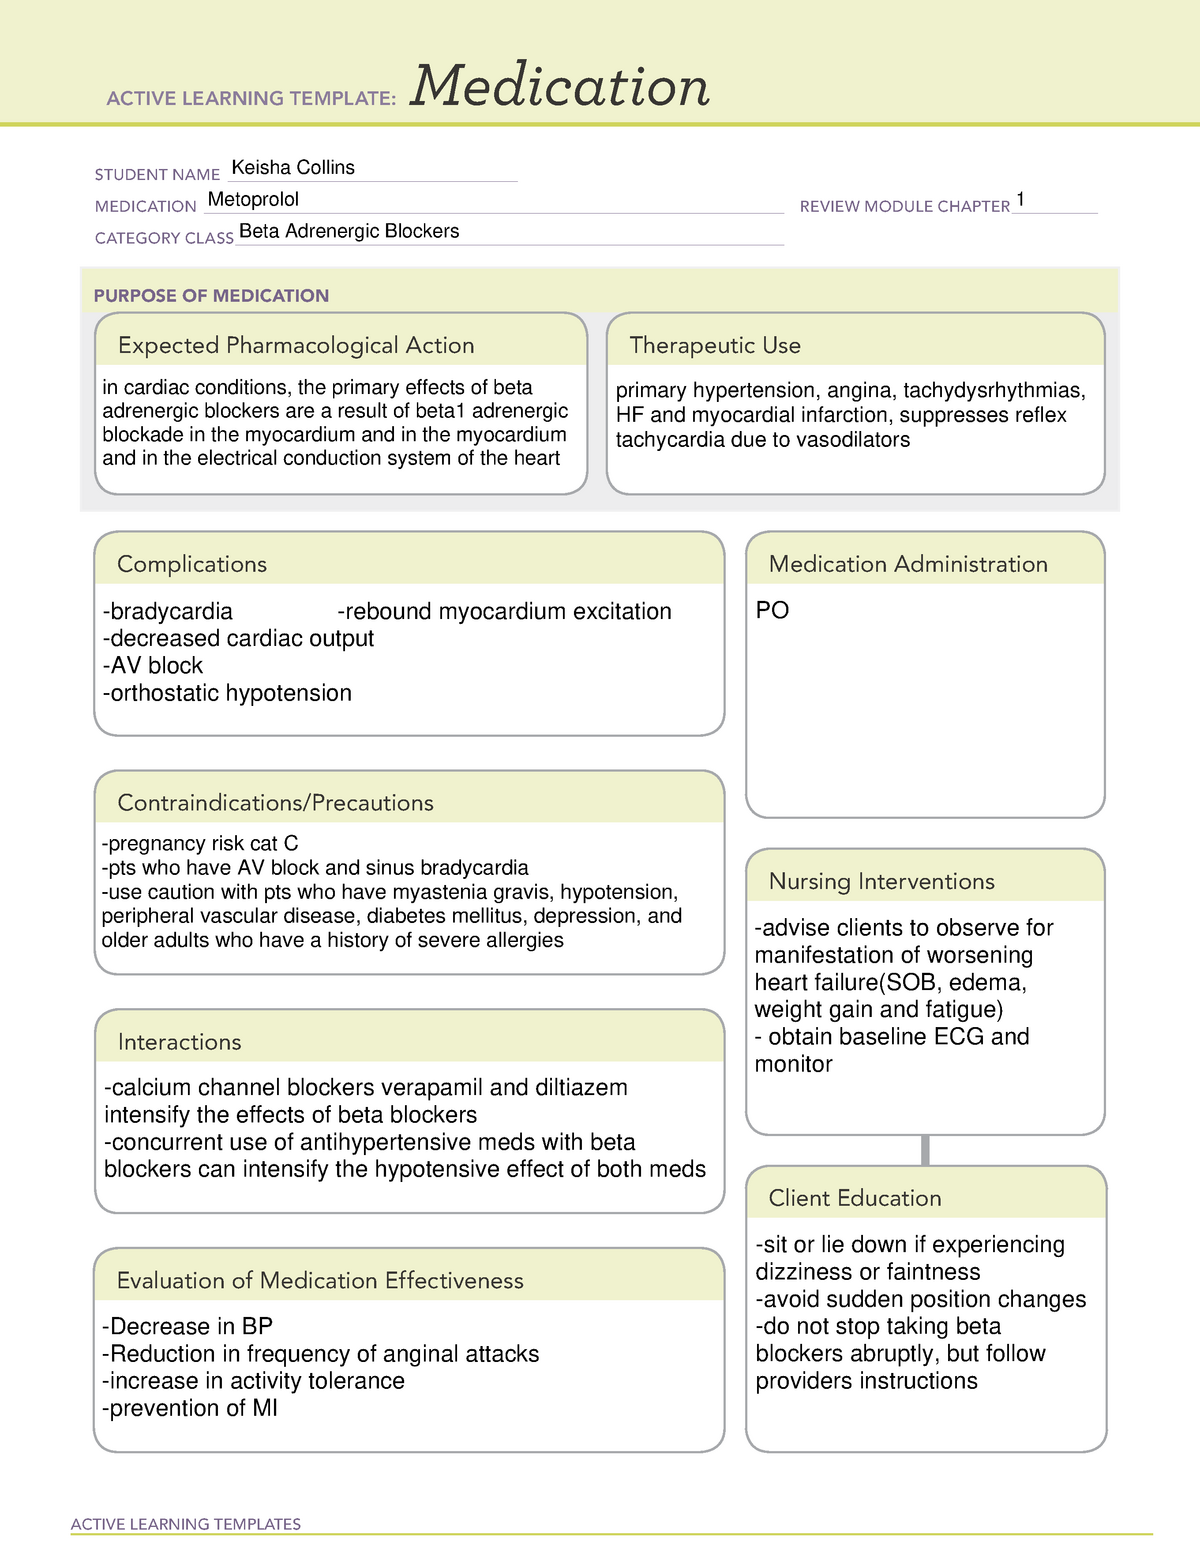 KC metoprolol template ACTIVE LEARNING TEMPLATES Medication STUDENT